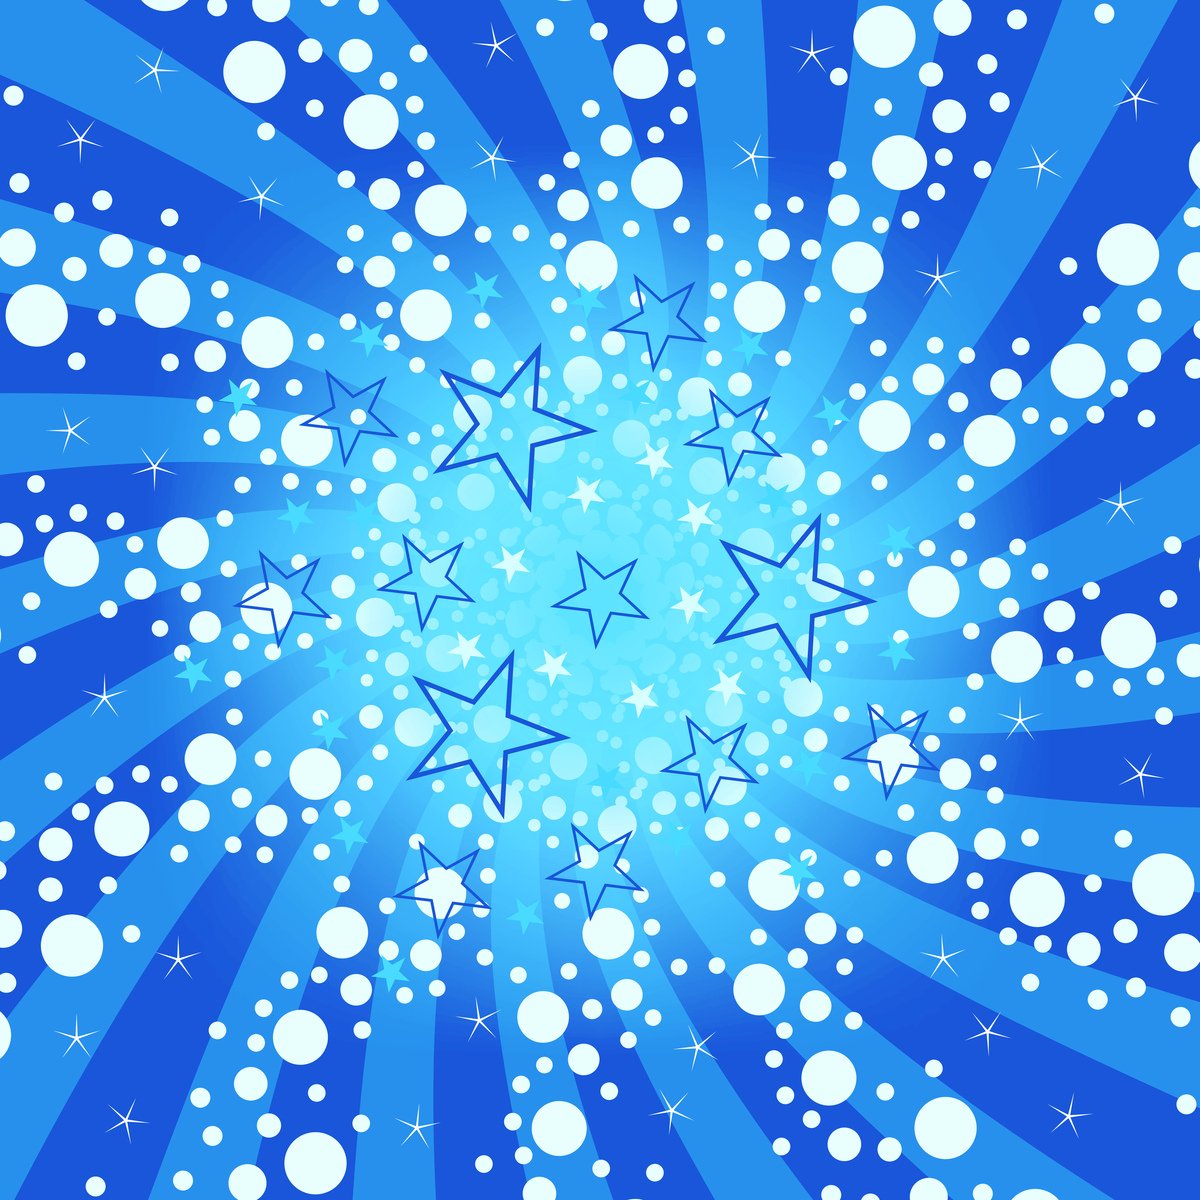 the abstract background with a star pattern and dots in blue